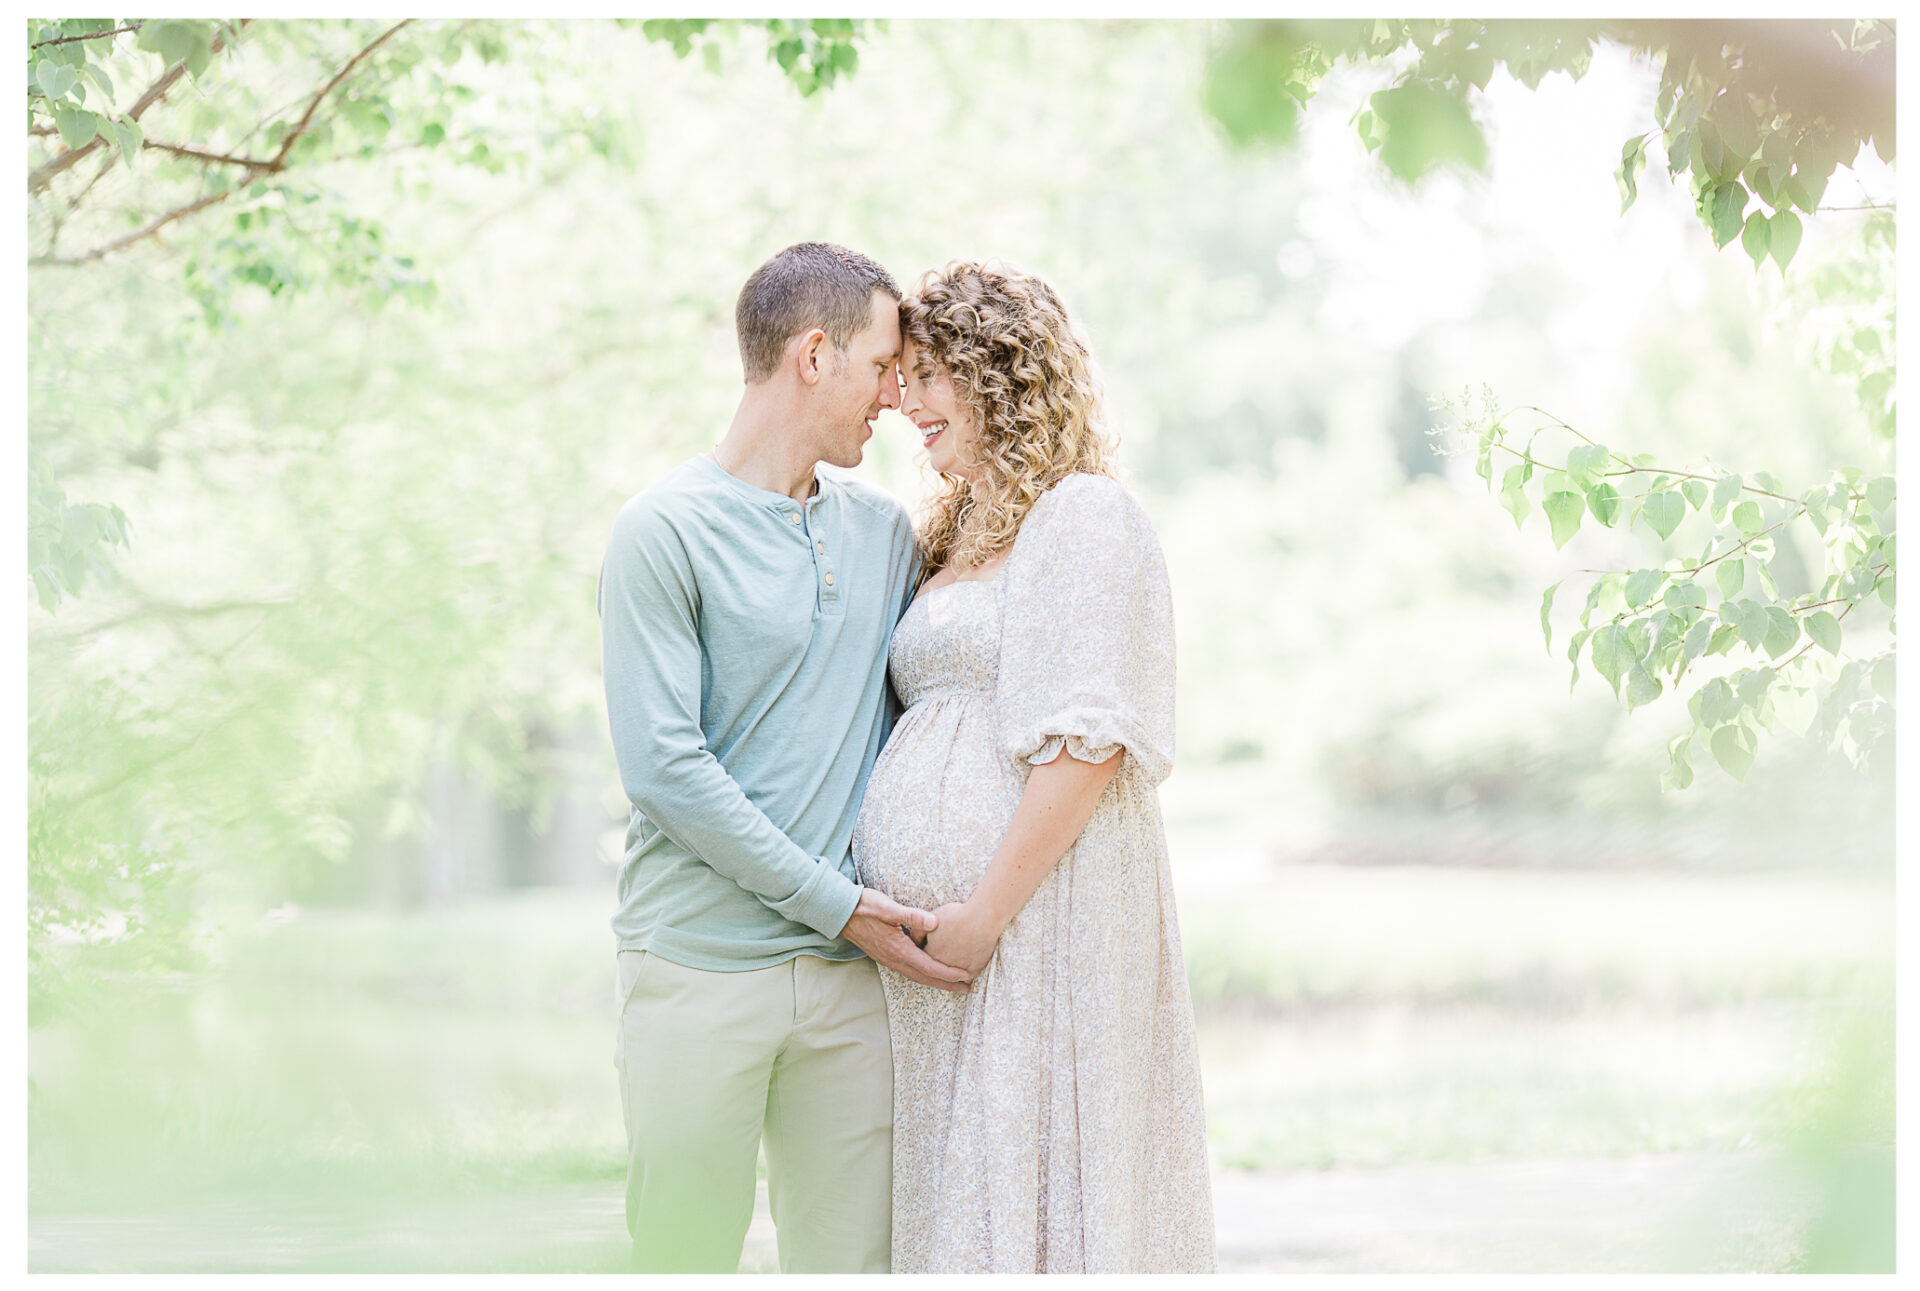 Winter Freire Photography | maternity session outdoors | husband and wife smiling together while placing their hands on the baby bump